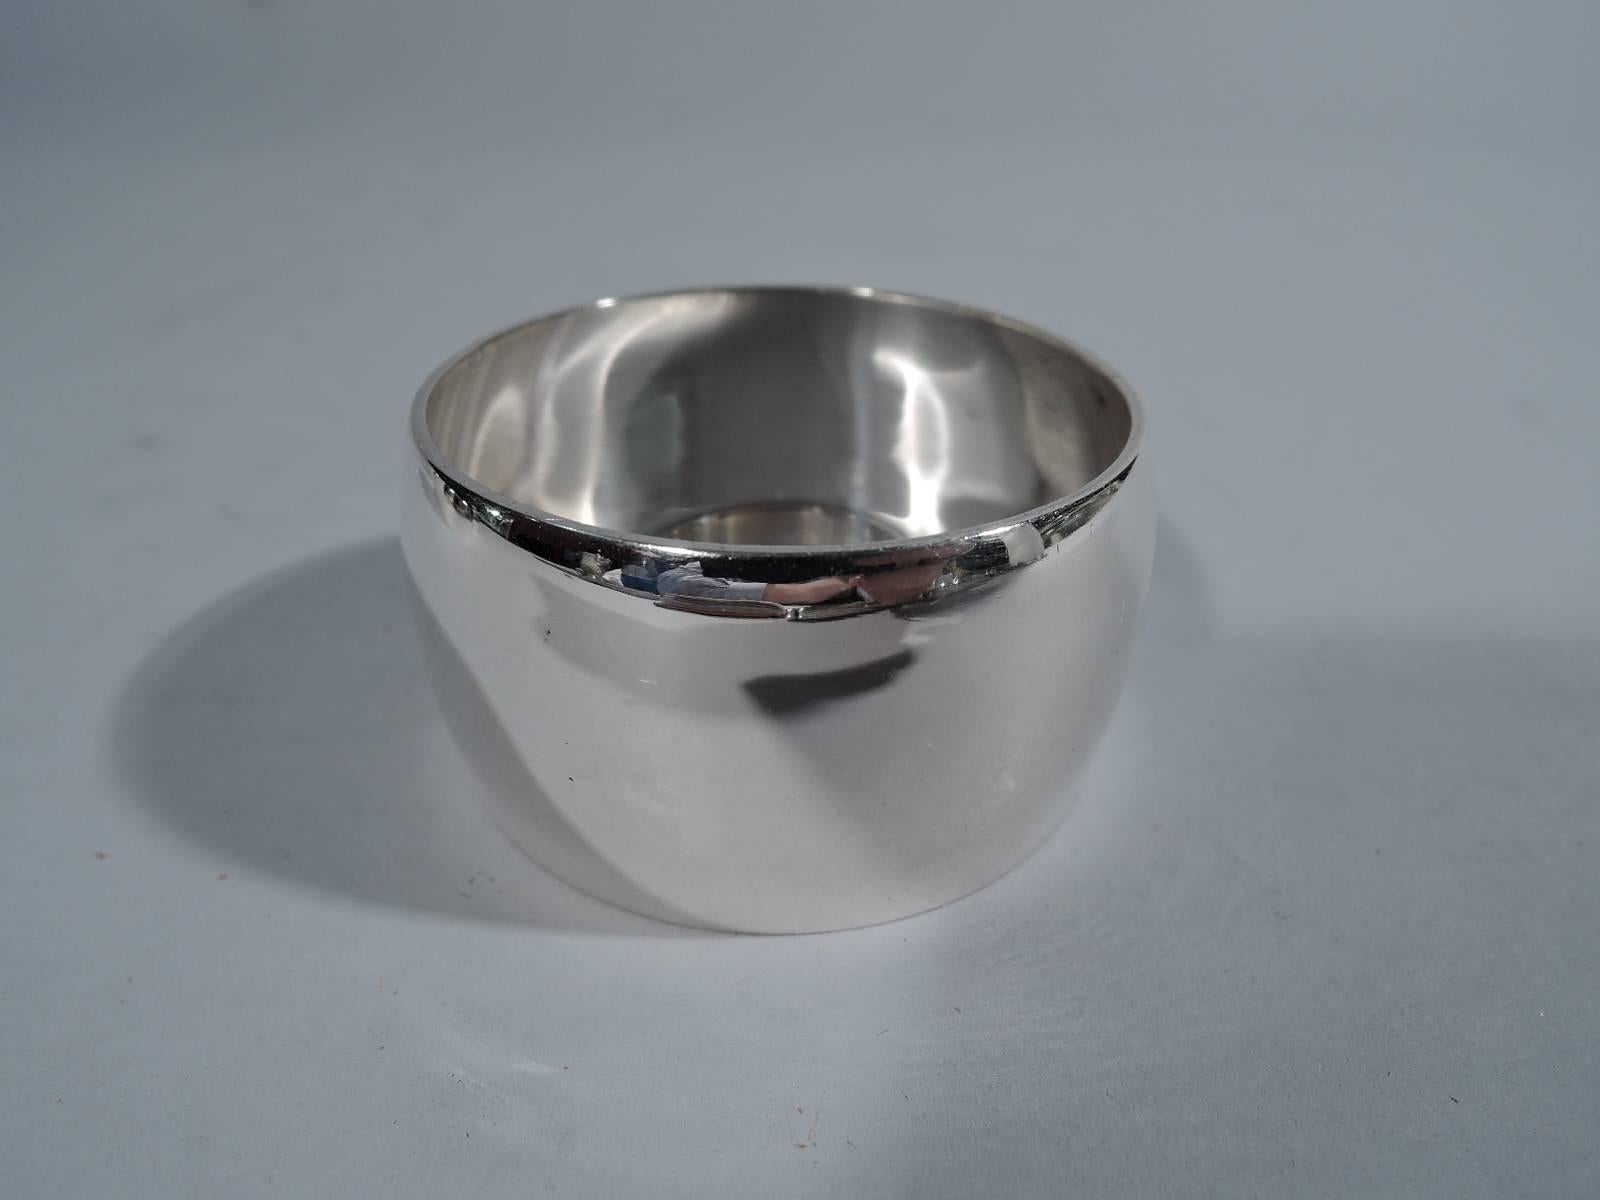 Set of four sterling silver napkin rings. Made by Tiffany & Co. in New York. Each: Plain and curved sides. Super functional and elegant form. Hallmark includes pattern no. 20272, director’s letter m (1907-1947), and wartime star (1943-1945). Total